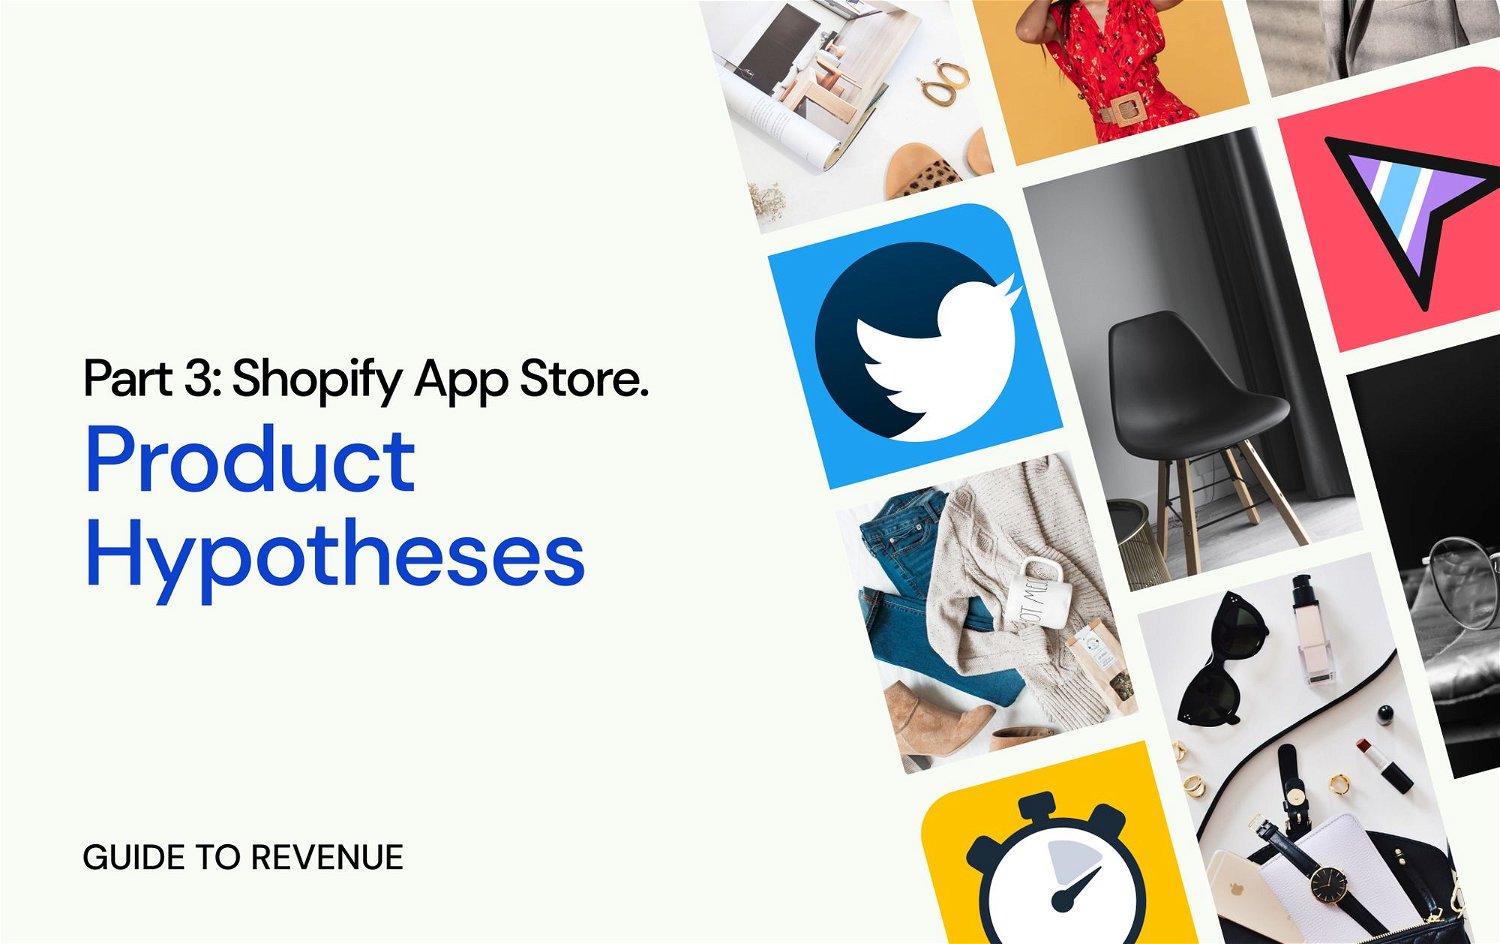 Shopify App Store. Guide to revenue. Product hypotheses - SpurIT